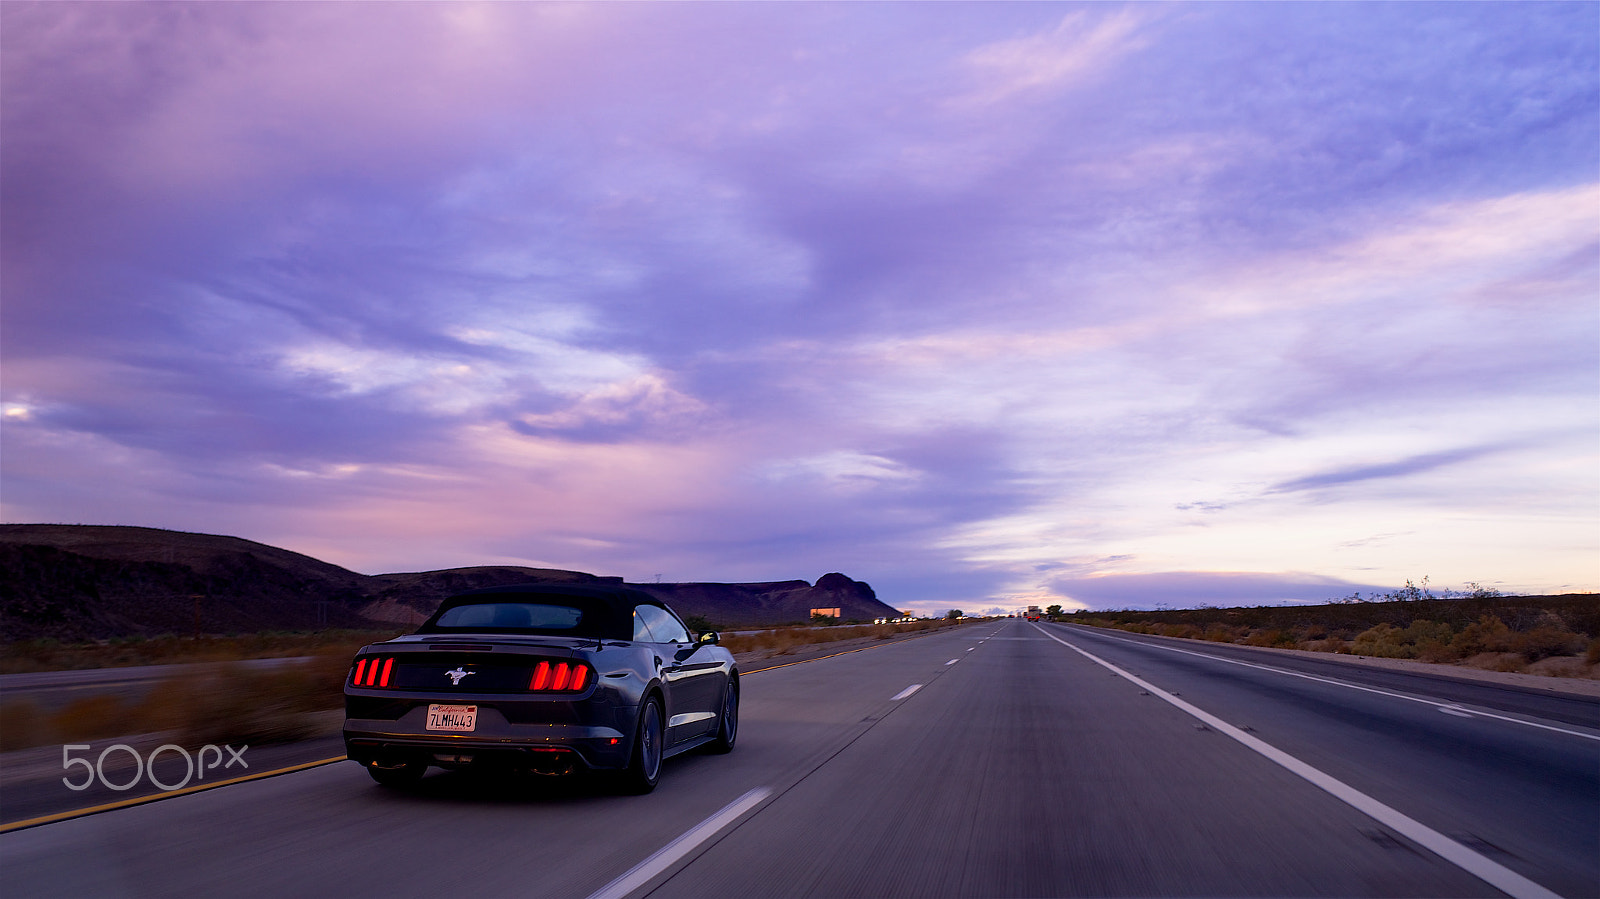 Sony a7 + Sony FE 28mm F2 sample photo. Black mustang on the road photography